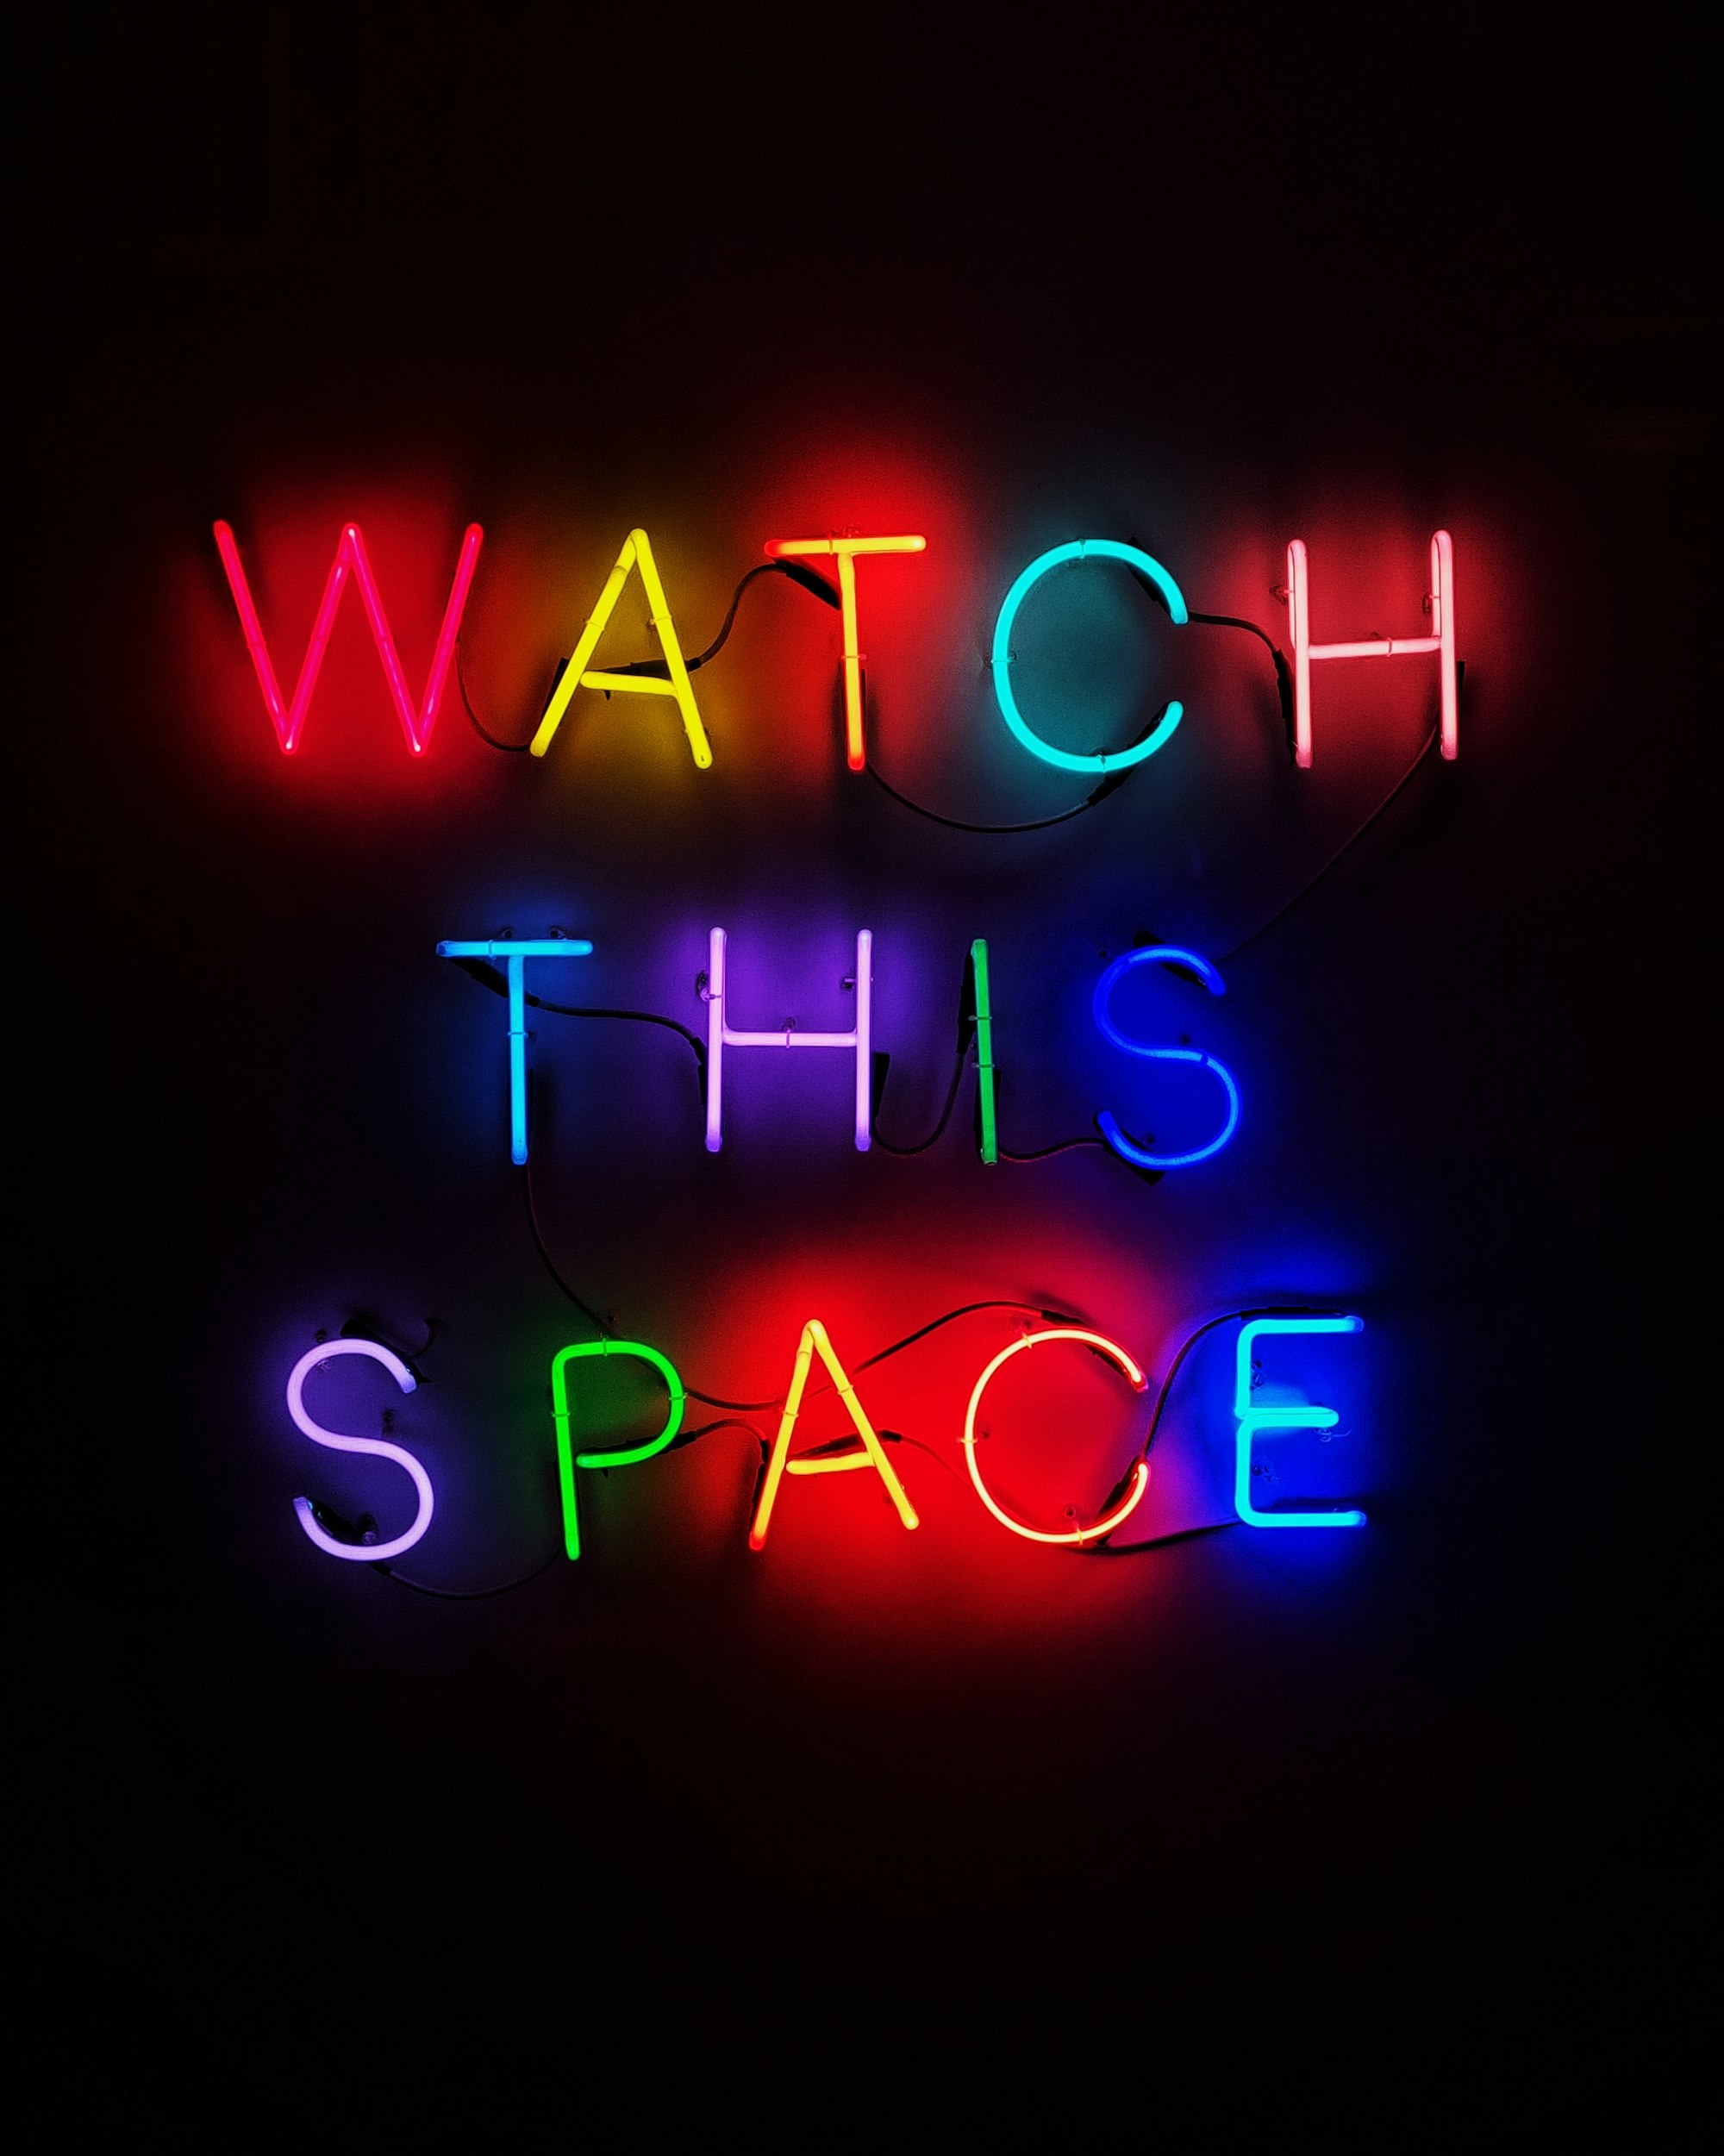 Multi-colored Neon lights which spell out 'Watch This Space'